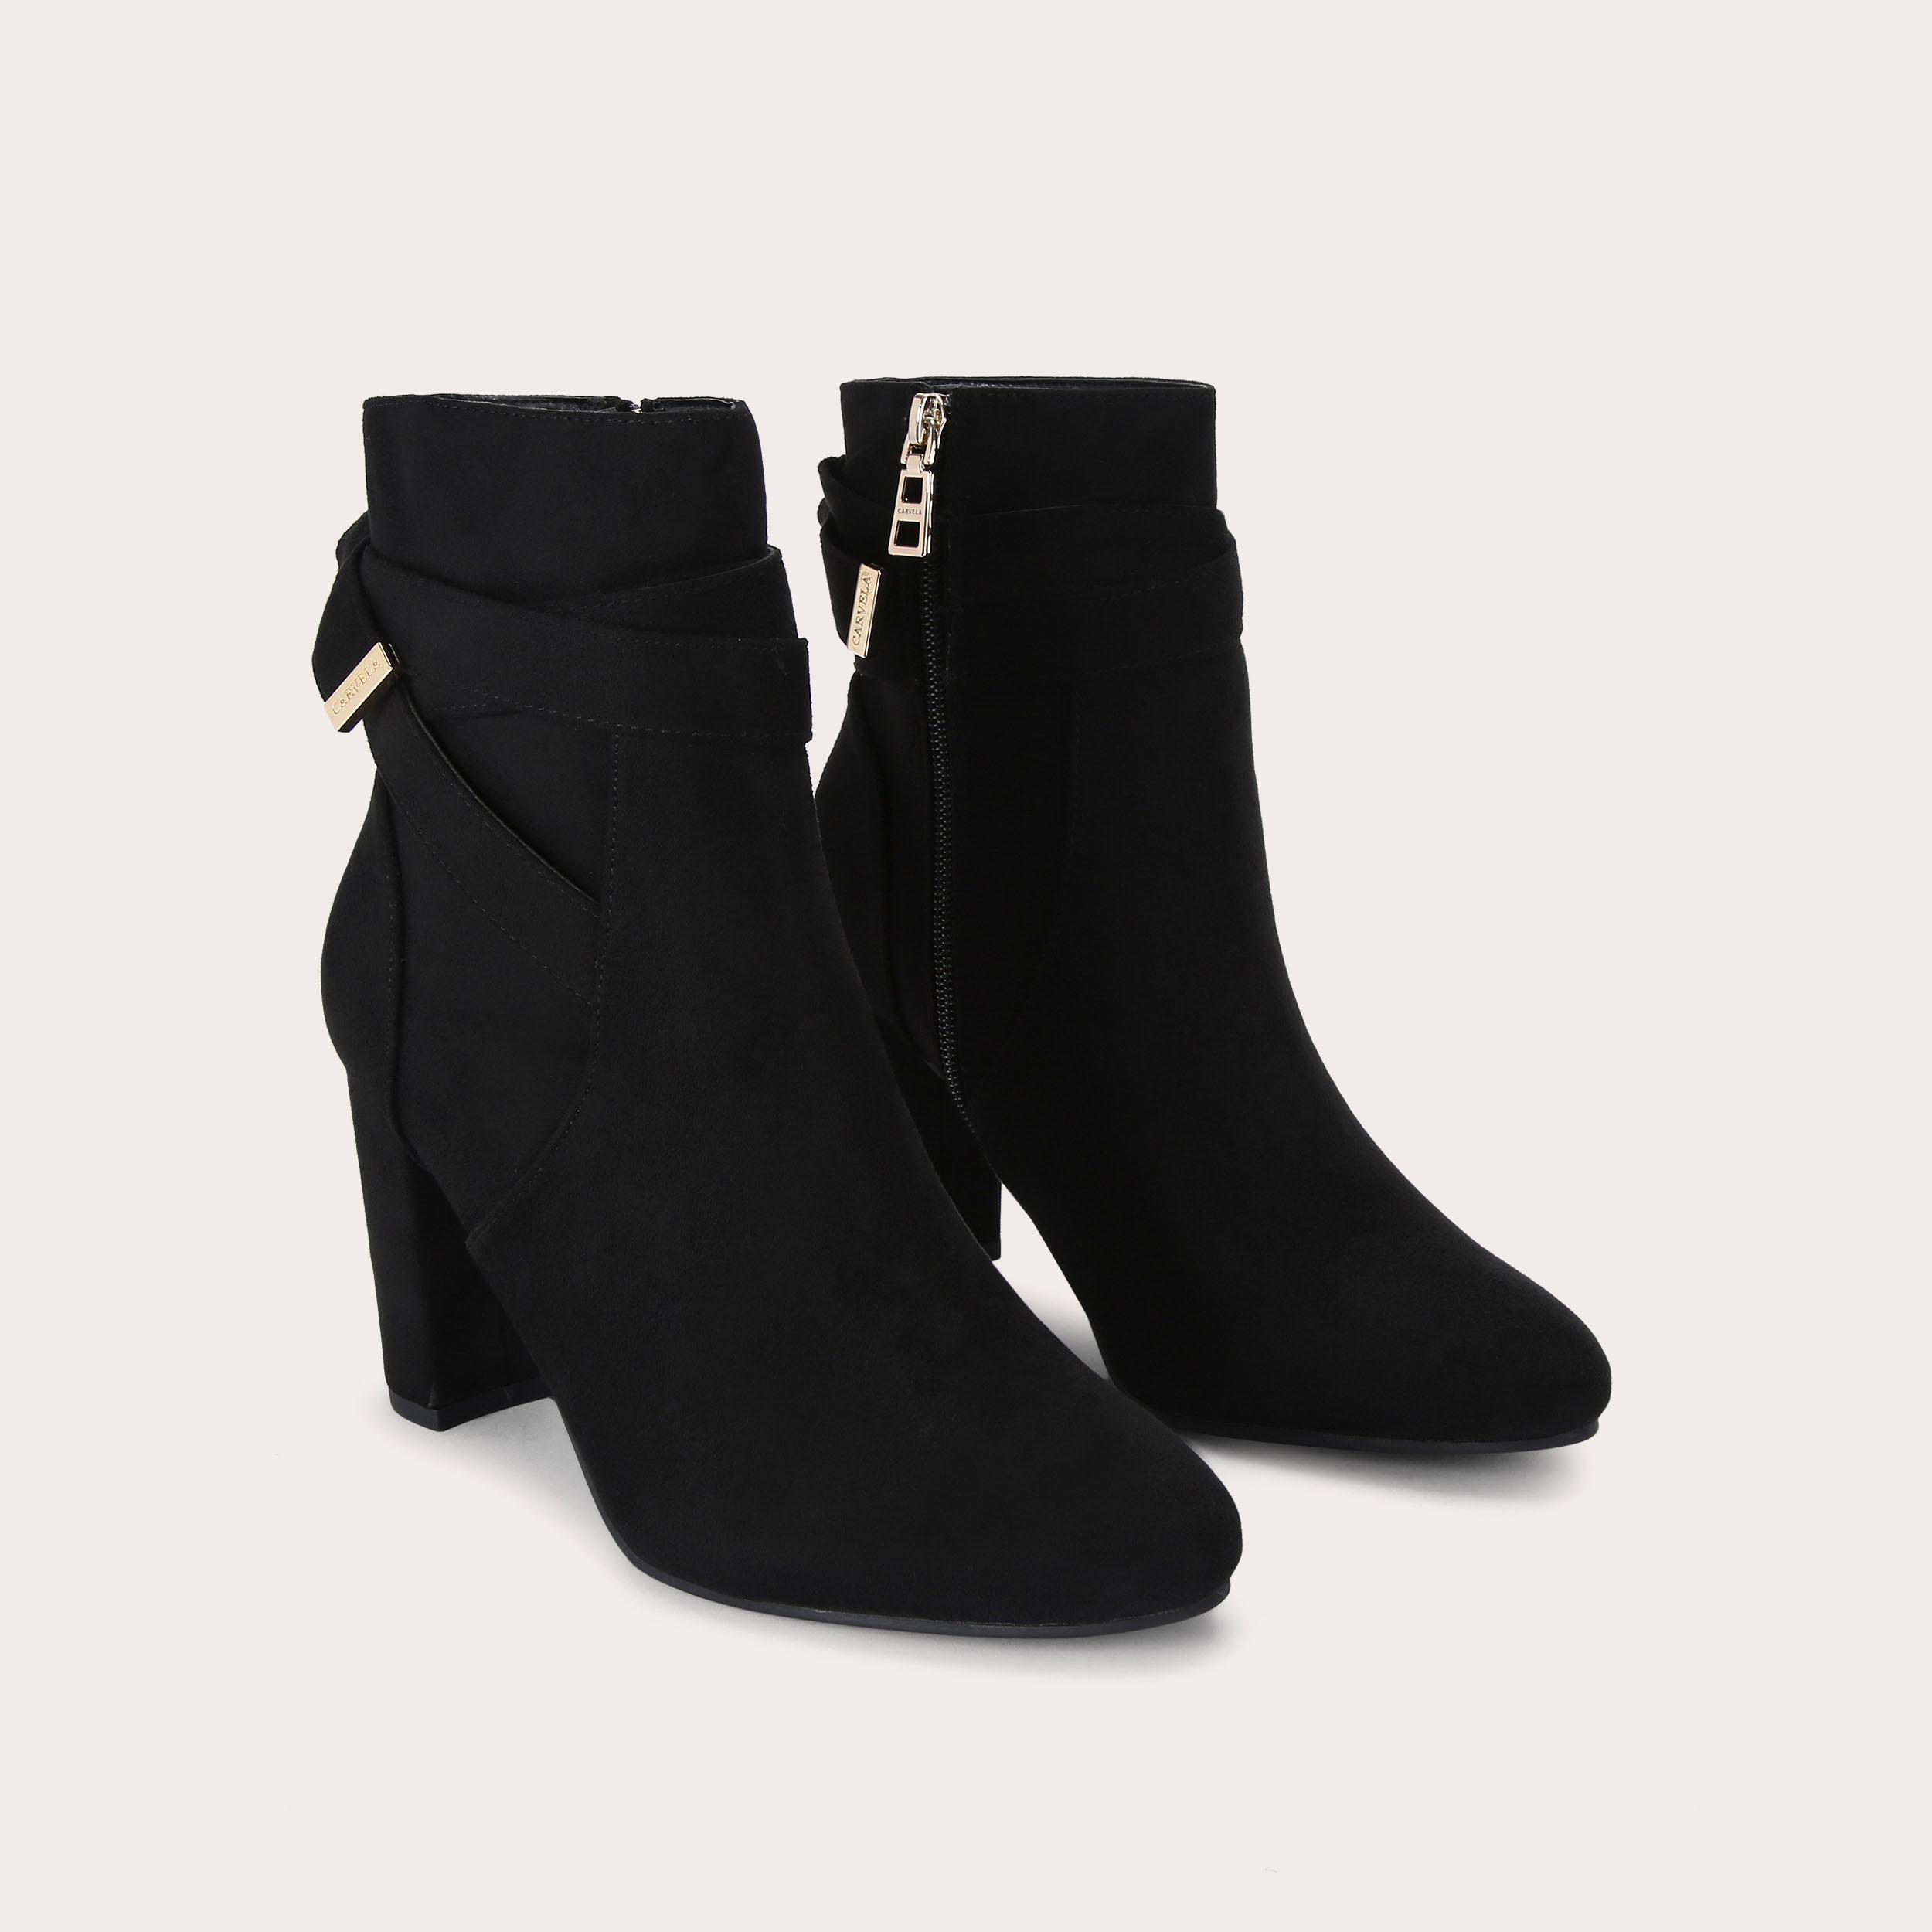 TEMPT Black Microsuede Heeled Boots by CARVELA